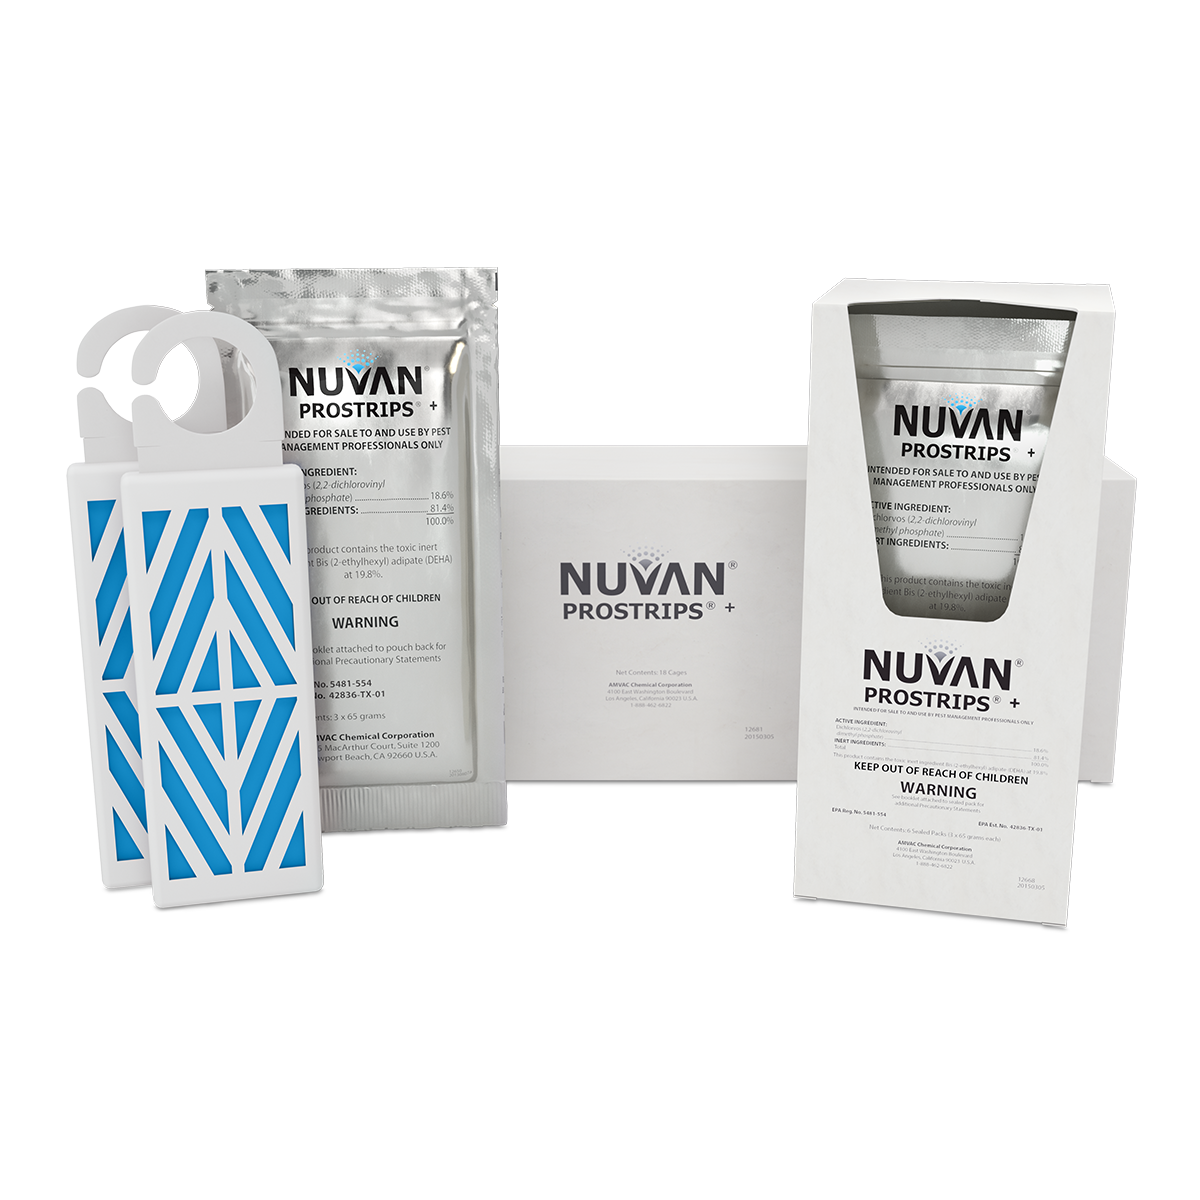 Nuvan Prostrips Plus product package